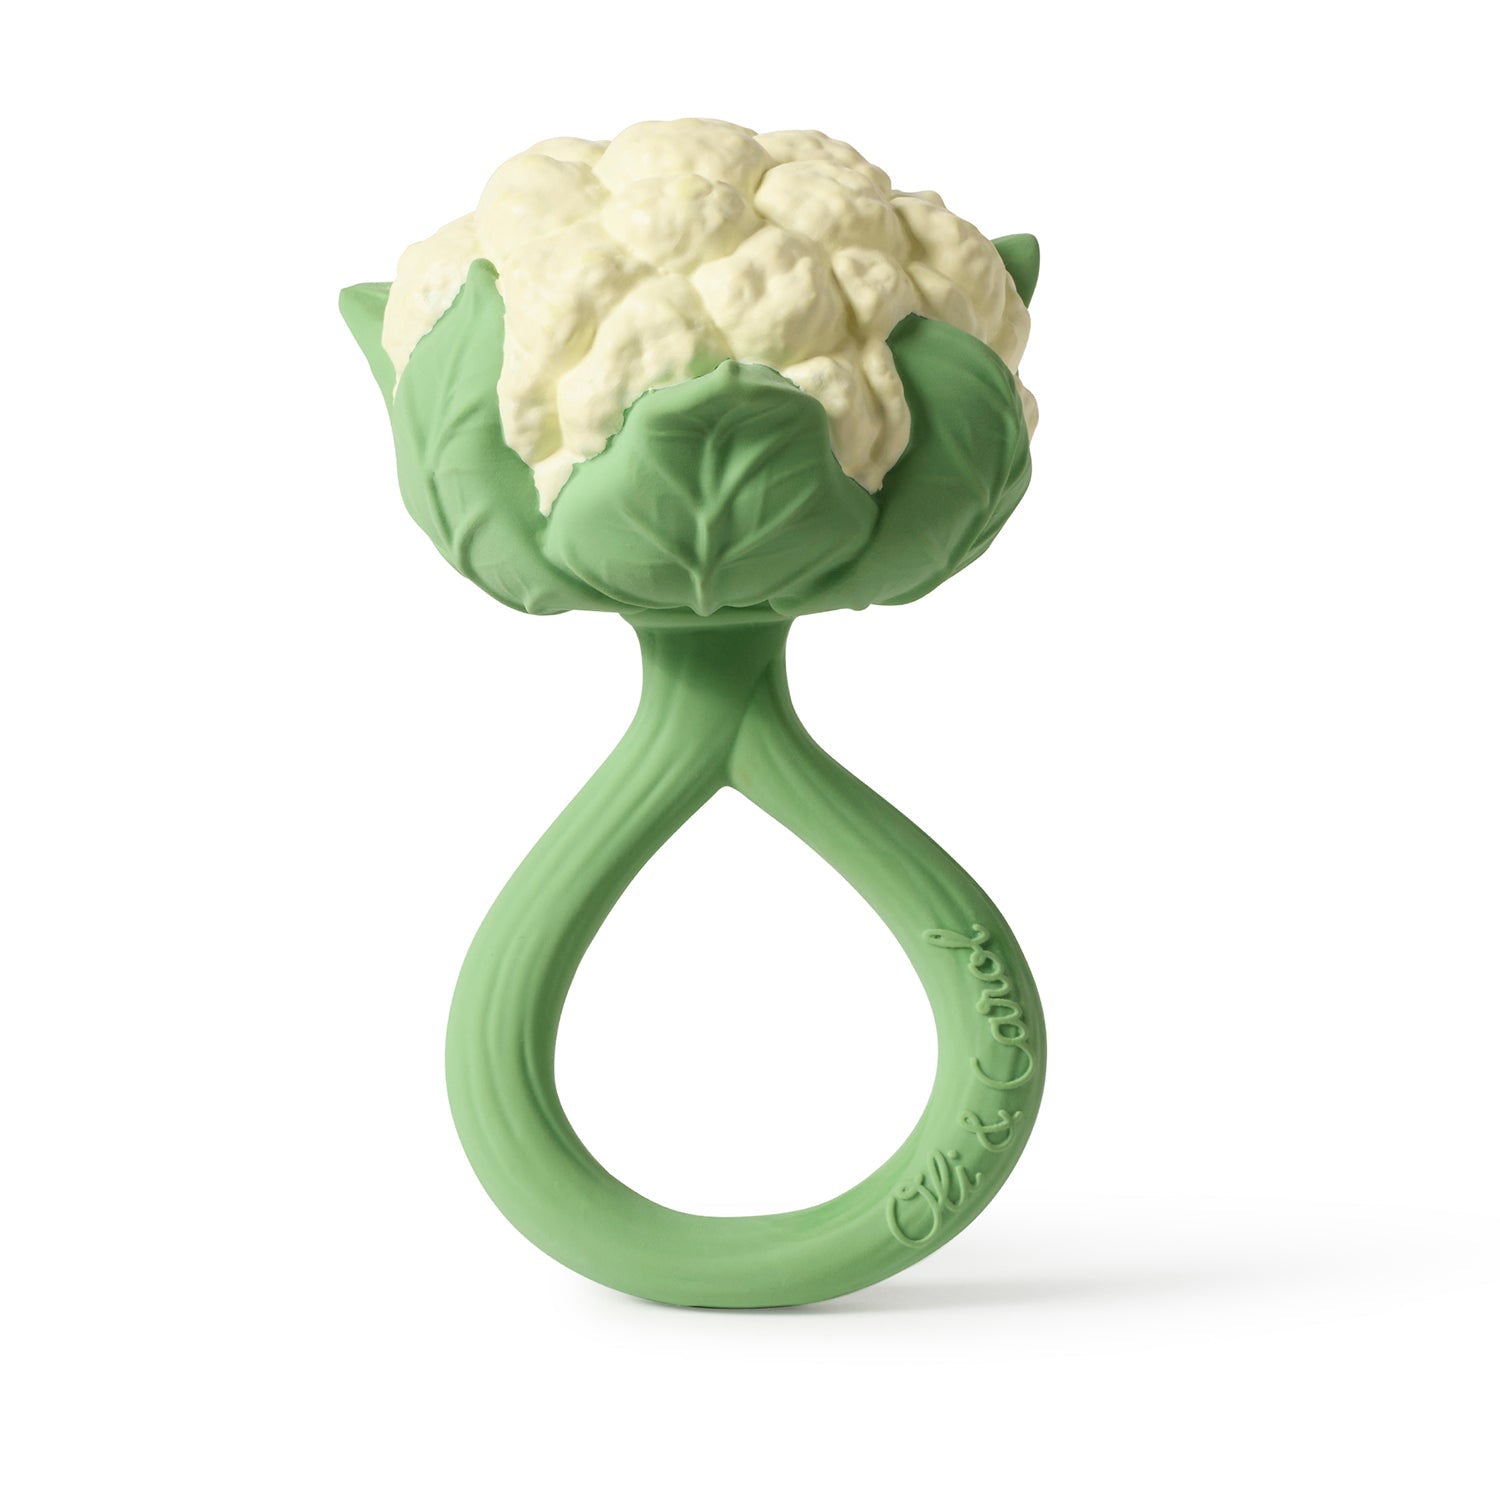 Oli & Carol - Natural Rattle Toys - all things being eco chilliwack - natural rubber teething toys - cauliflower